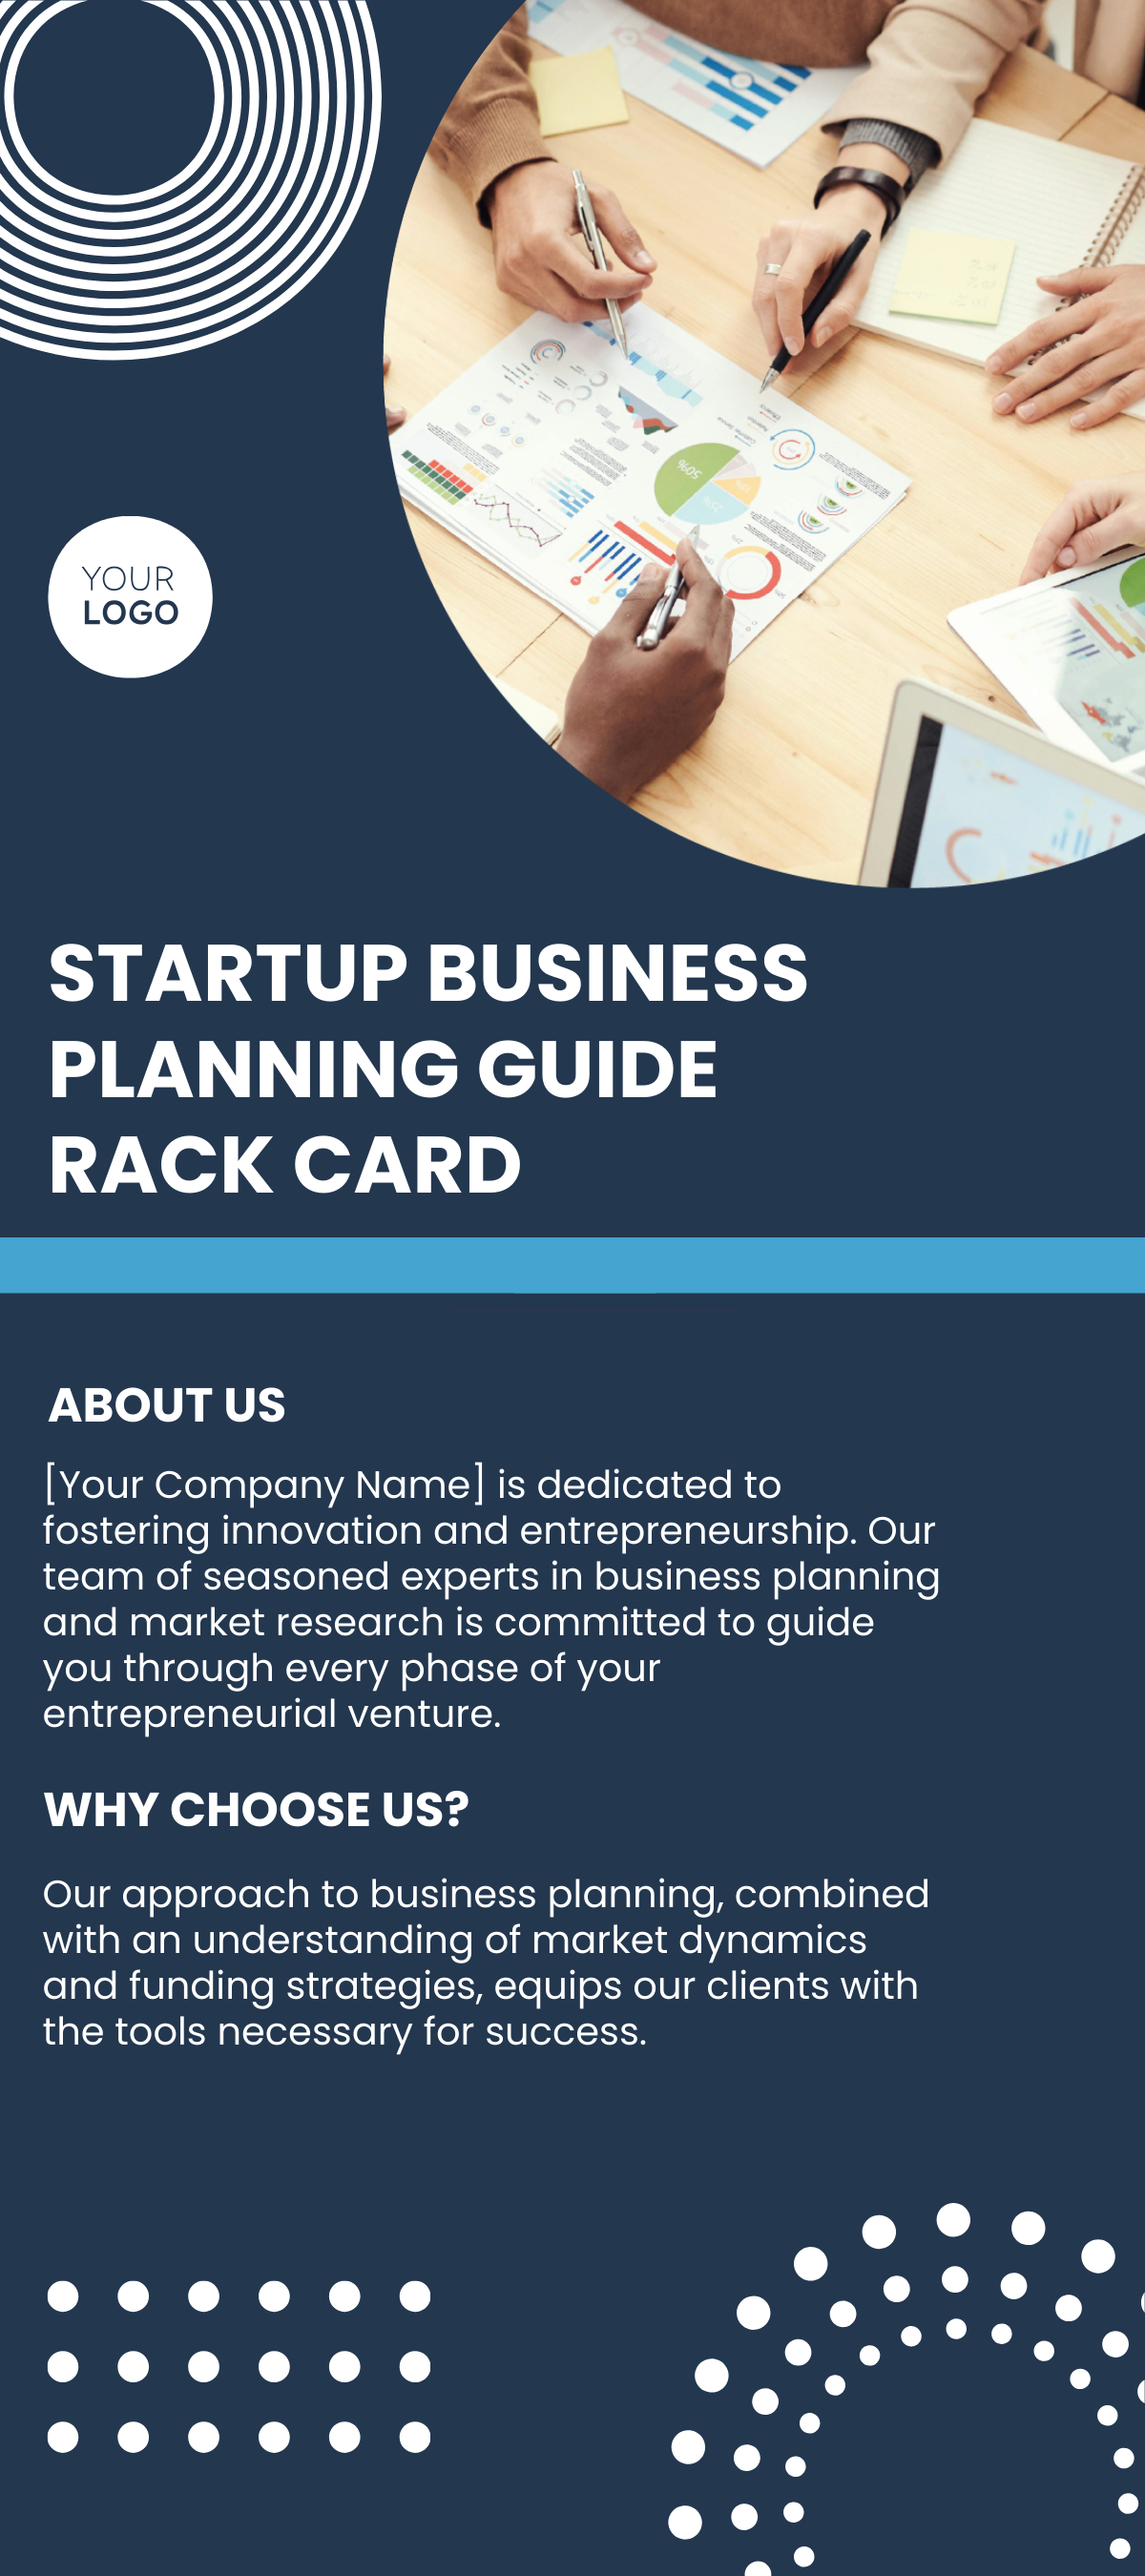 Startup Business Planning Guide Rack Card